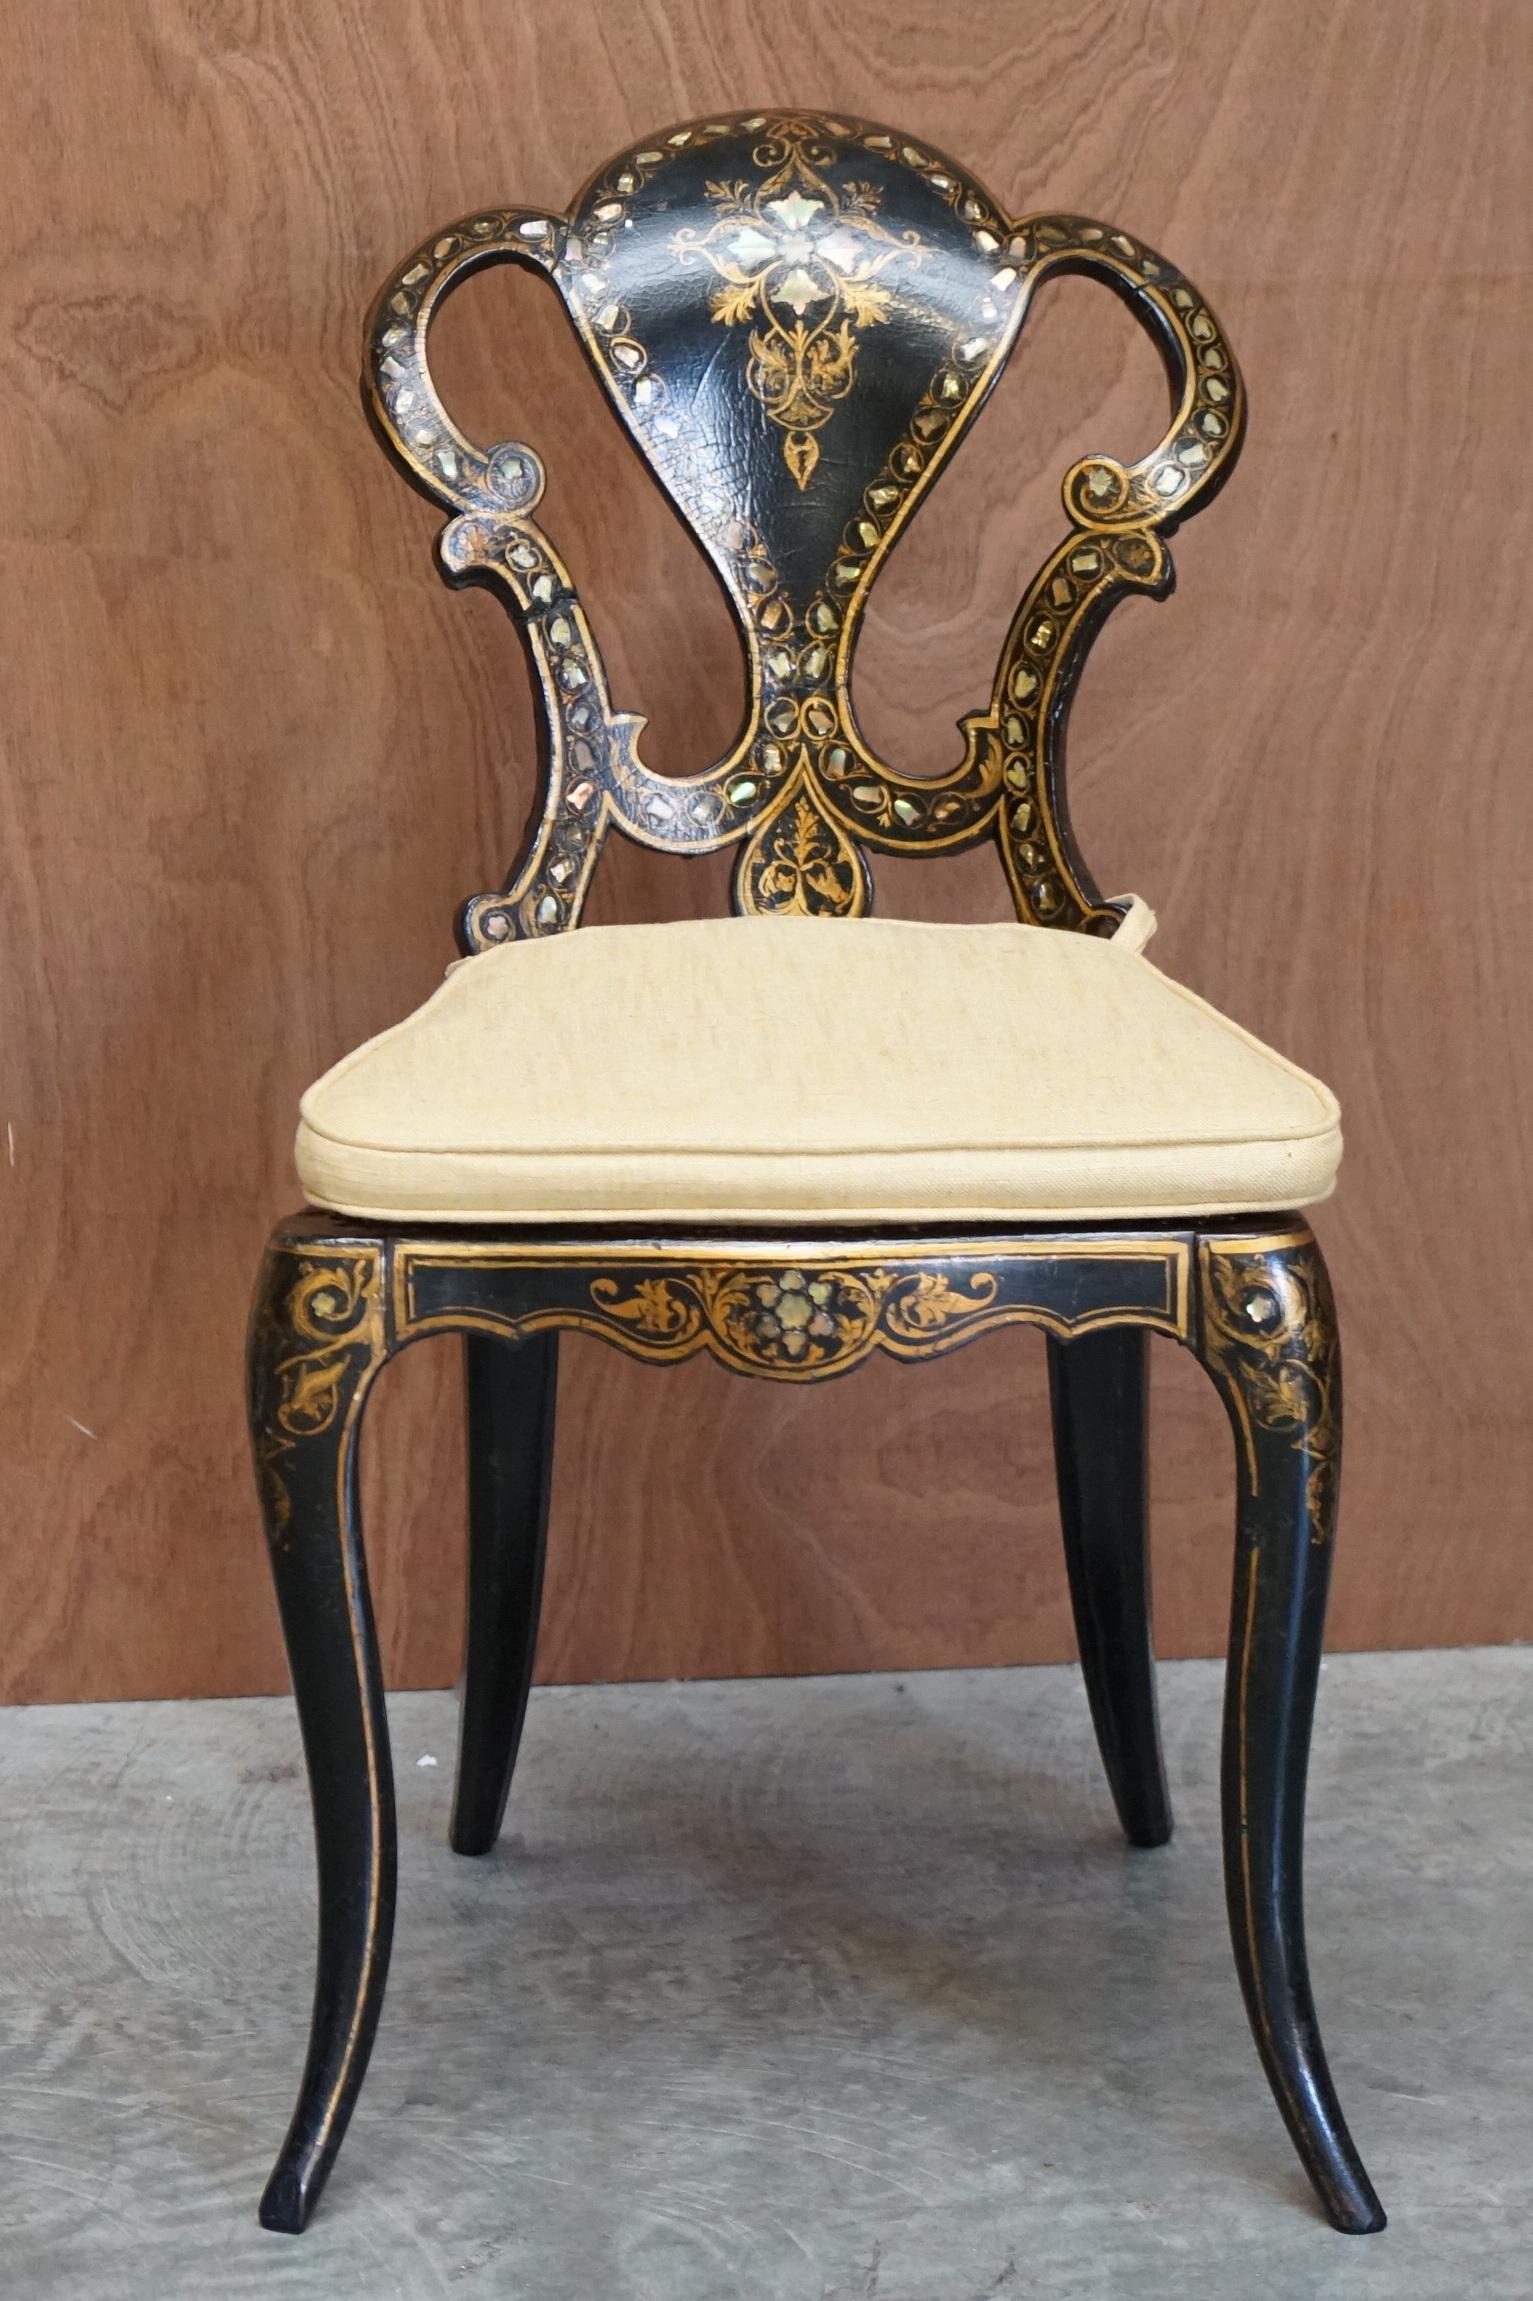 We are delighted to offer for sale this exquisite fully stamped original circa 1815 Regency Jennens & Bettridge LTD Birmingham ebonised gold leaf painted occasional bergere chair

A very good looking well made and decorative chair. In truth, this